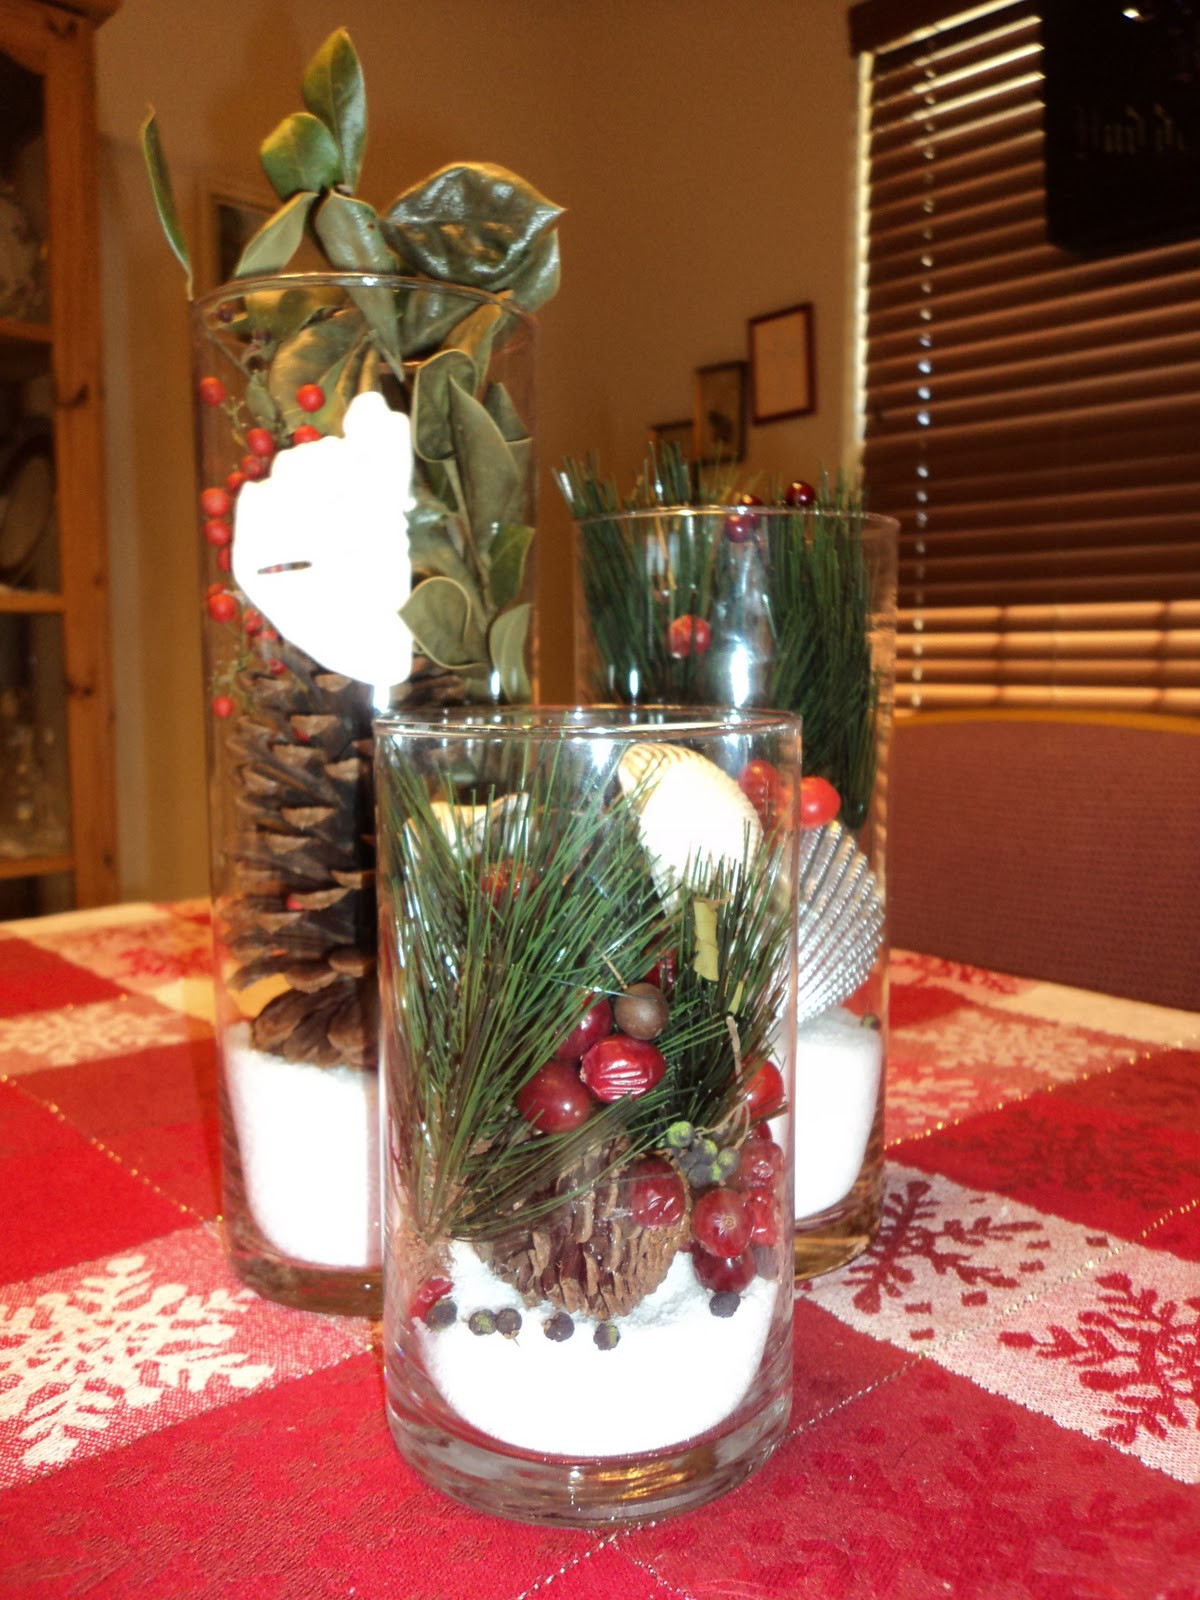 Christmas Table Decorations To Make
 BEAUTIFUL CHRISTMAS CENTERPIECES TO ENHANCE THE BEAUTY OF